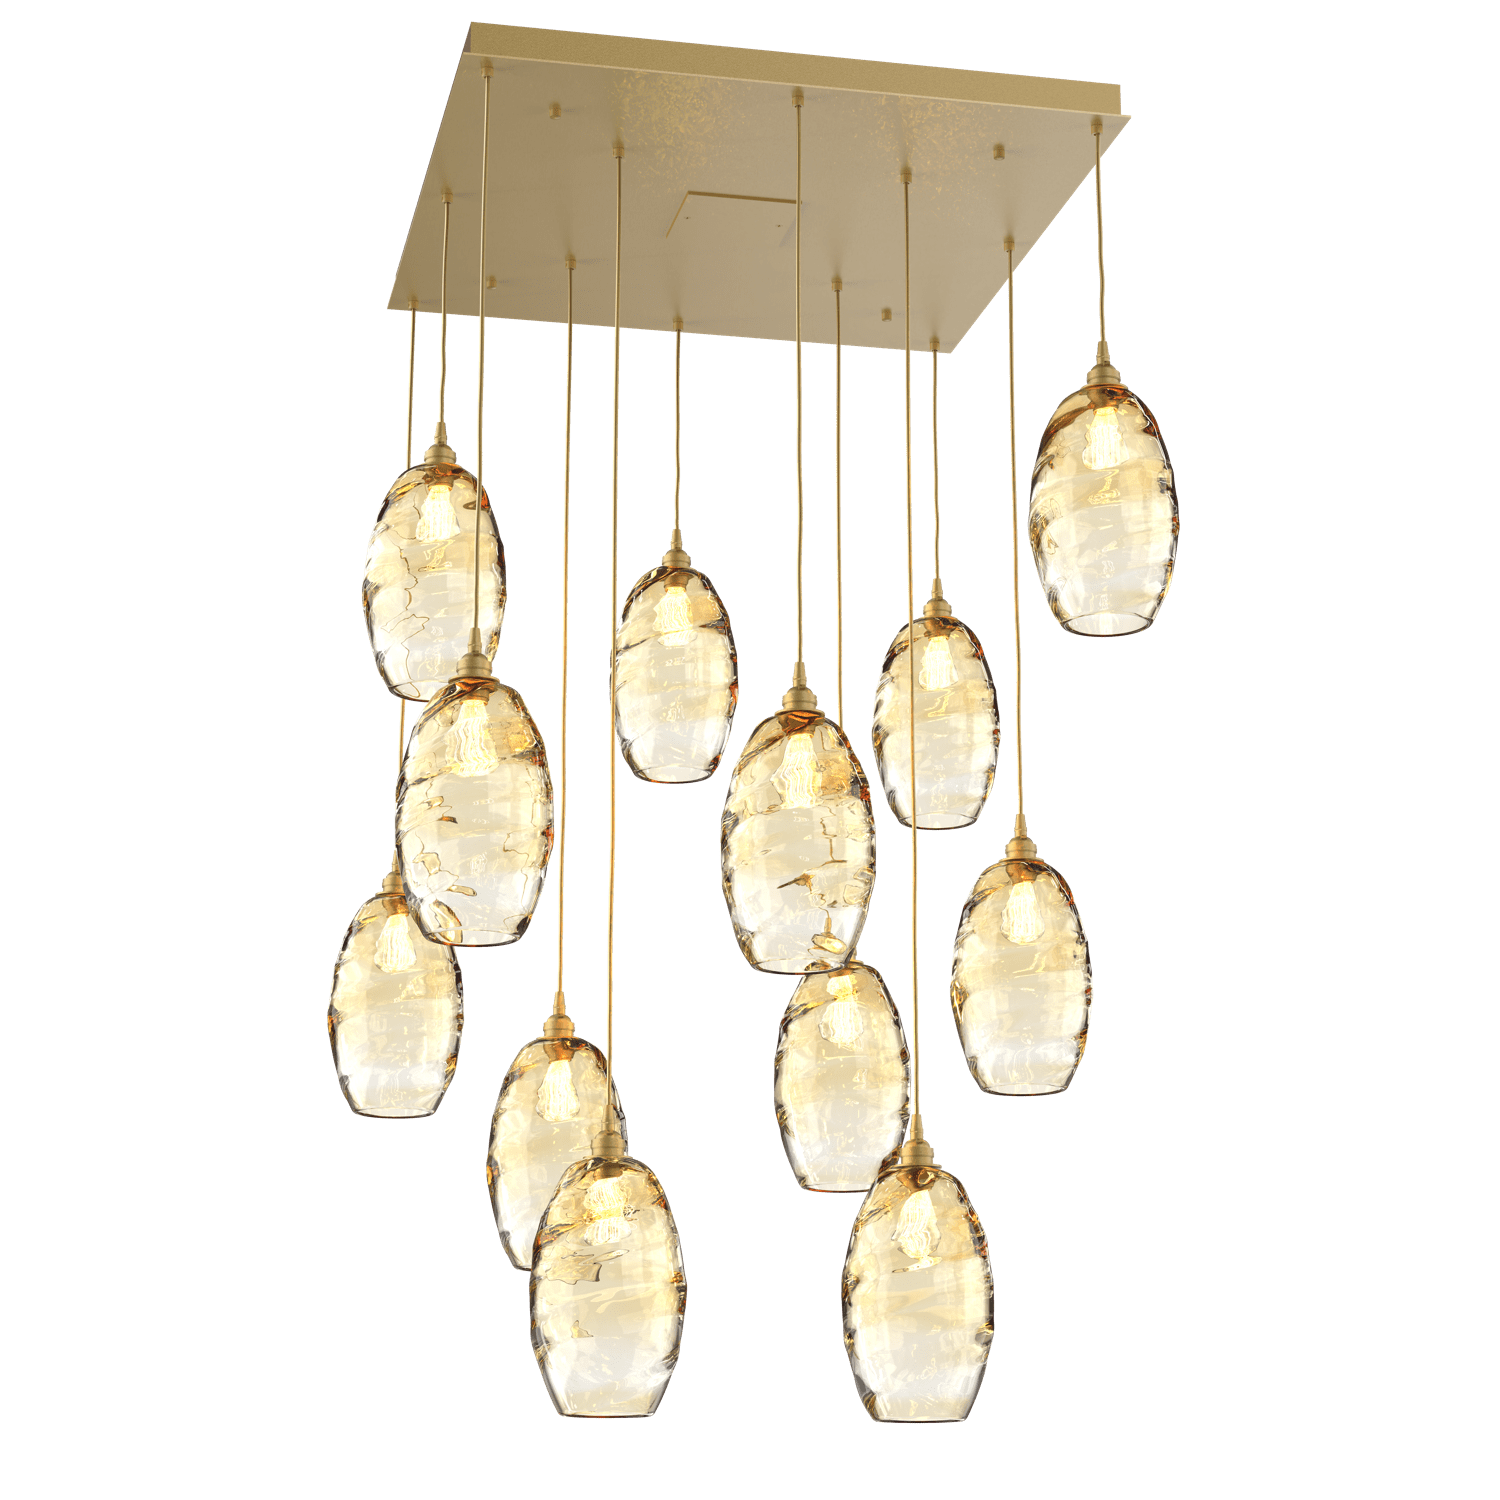 CHB0035-12-GB-OA-Hammerton-Studio-Optic-Blown-Glass-Elisse-12-light-square-pendant-chandelier-with-gilded-brass-finish-and-optic-amber-blown-glass-shades-and-incandescent-lamping